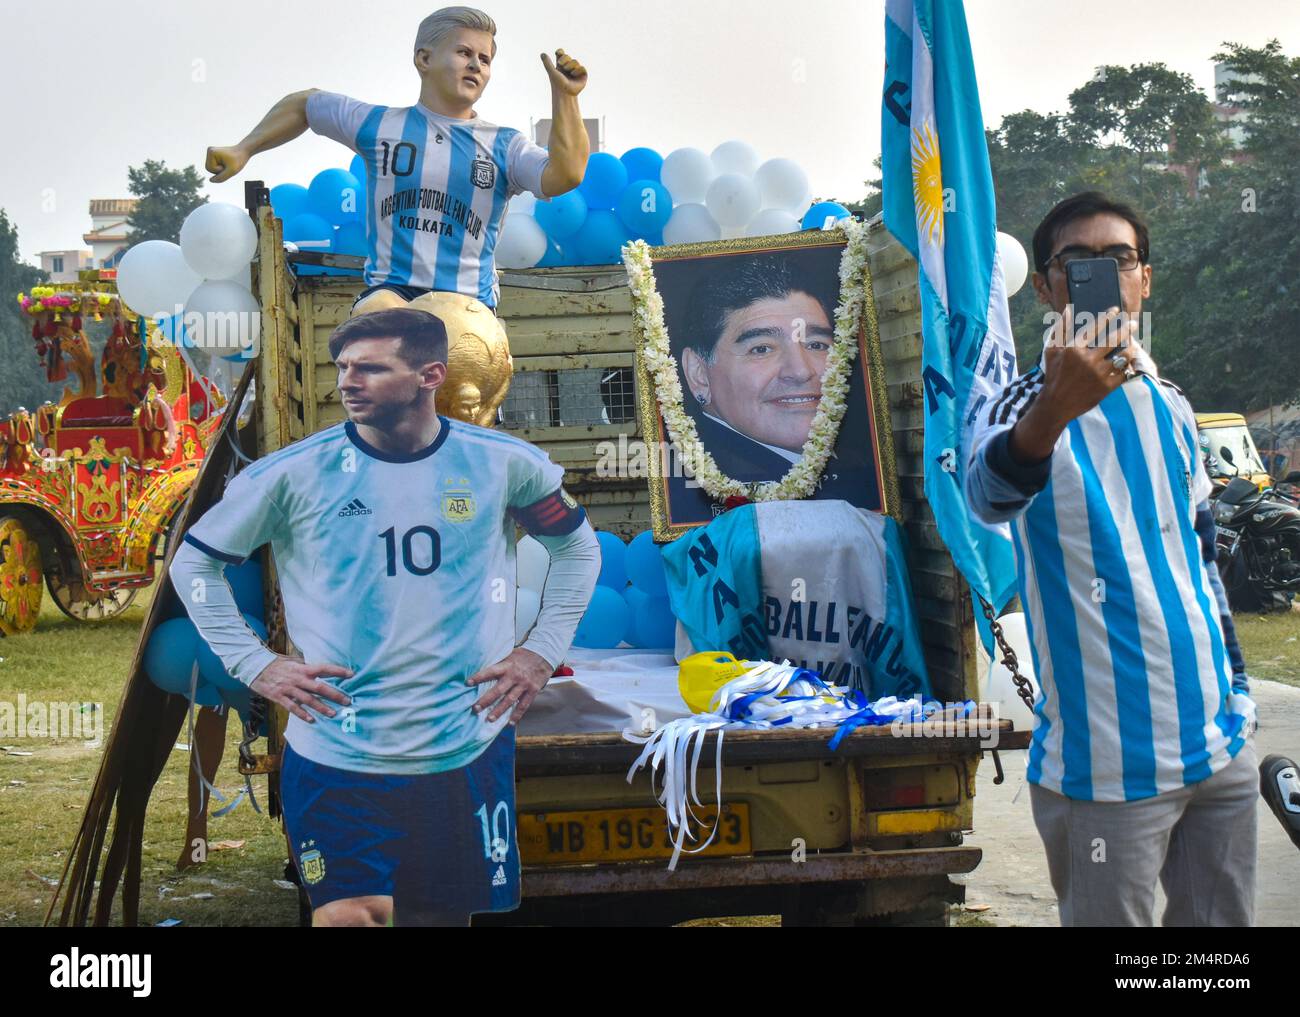 Kolkata, India. 22nd Dec, 2022. Members of the Argentina fan club display life-size cut out of Argentinas football team players during a rally to celebrate their win in the Qatar 2022 World Cup final football match between Argentina and France, in Kolkata. (Photo by Sudipta Das/Pacific Press) Credit: Pacific Press Media Production Corp./Alamy Live News Stock Photo